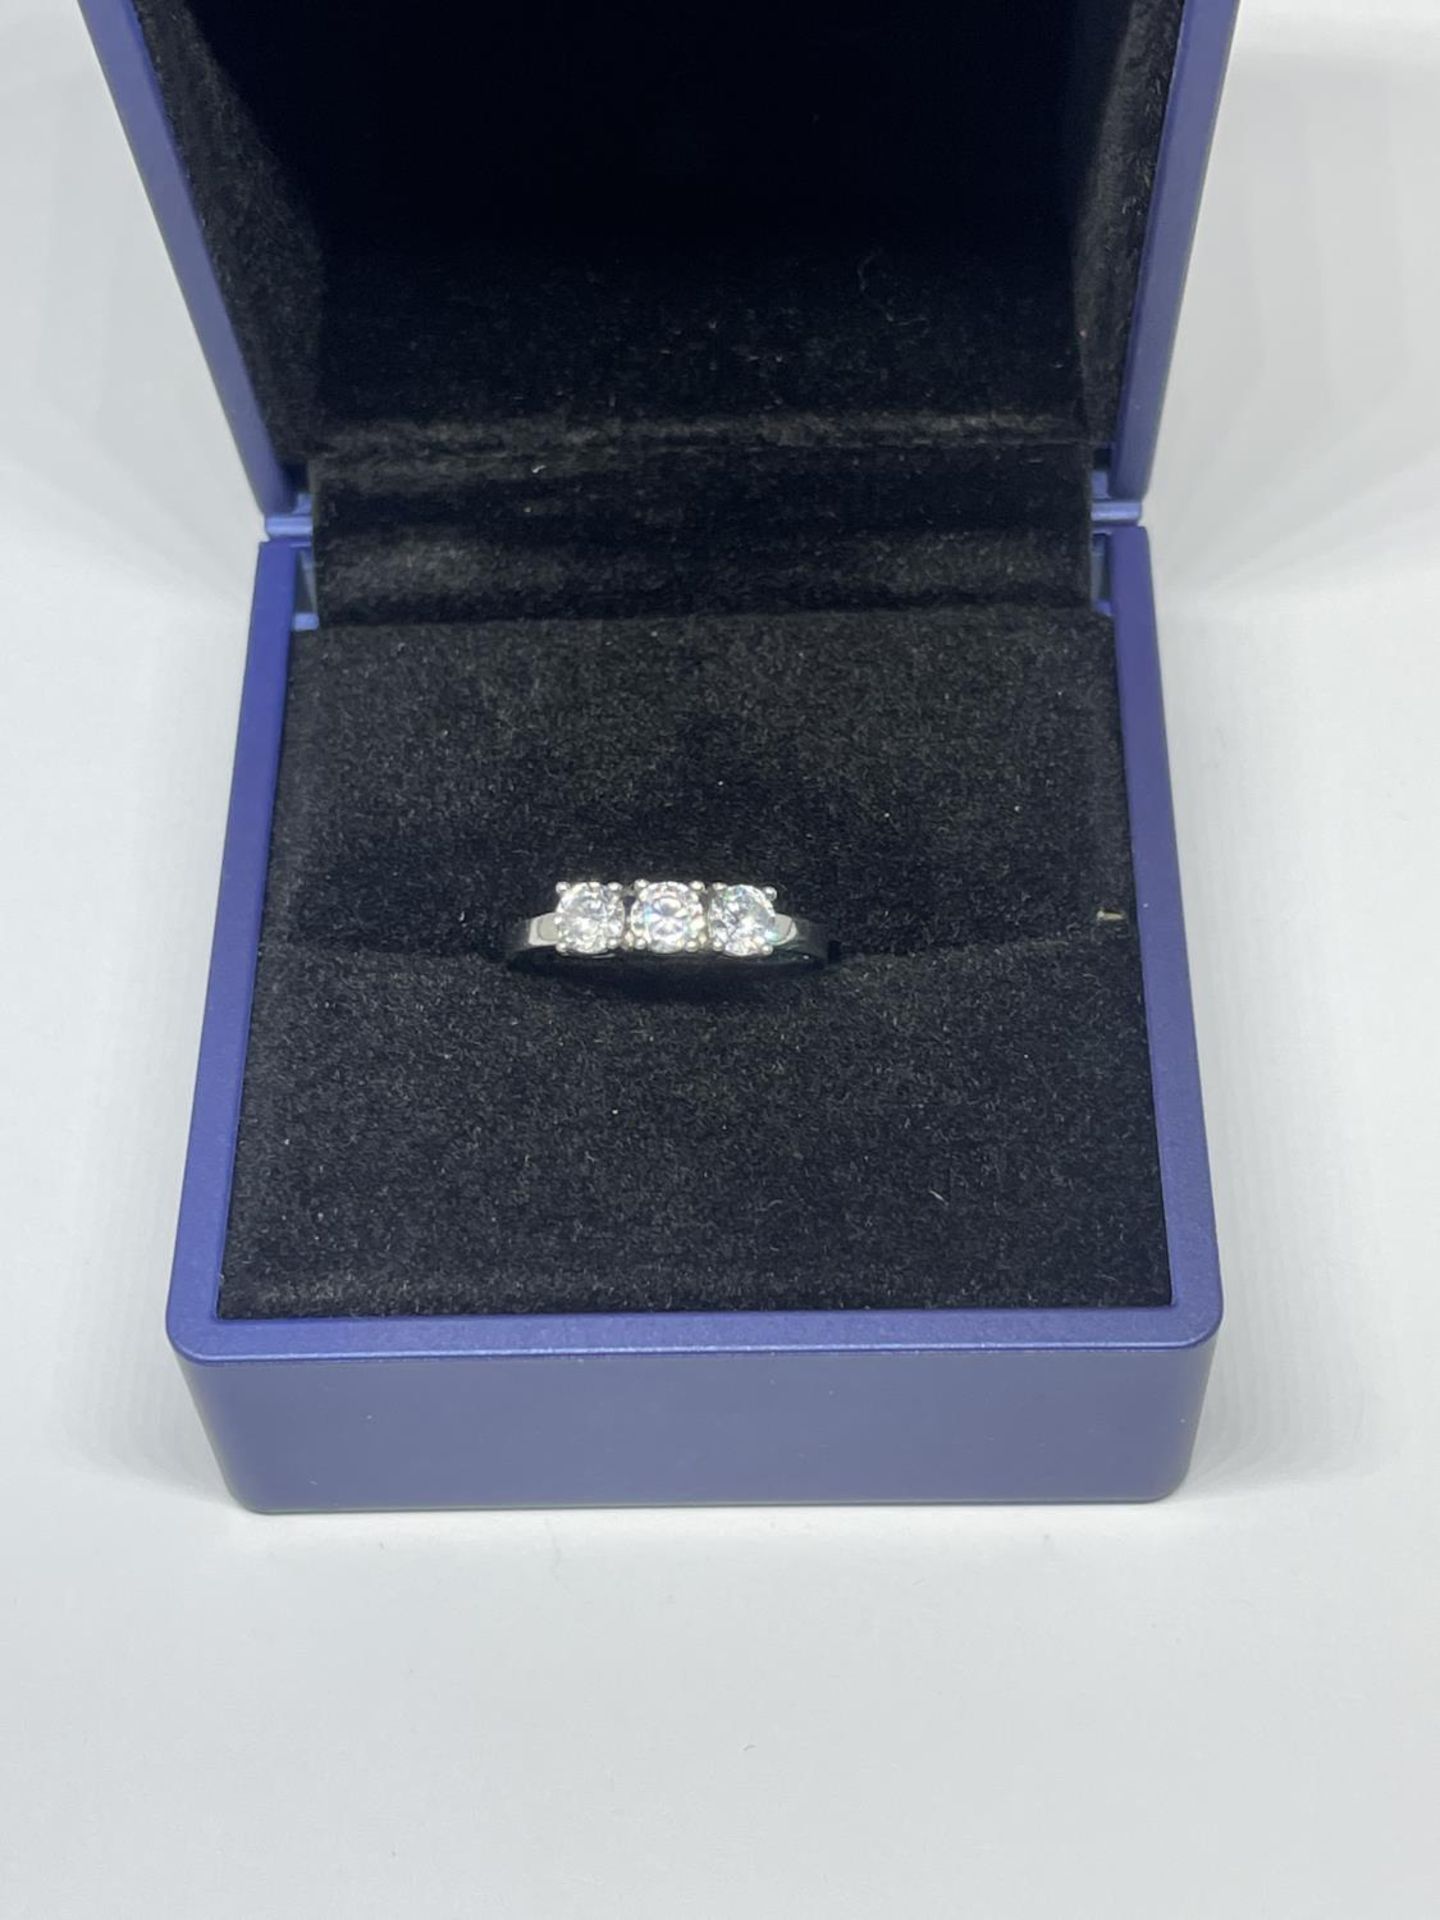 A LADIES SILVER DRESS RING, BOXED - Image 2 of 3